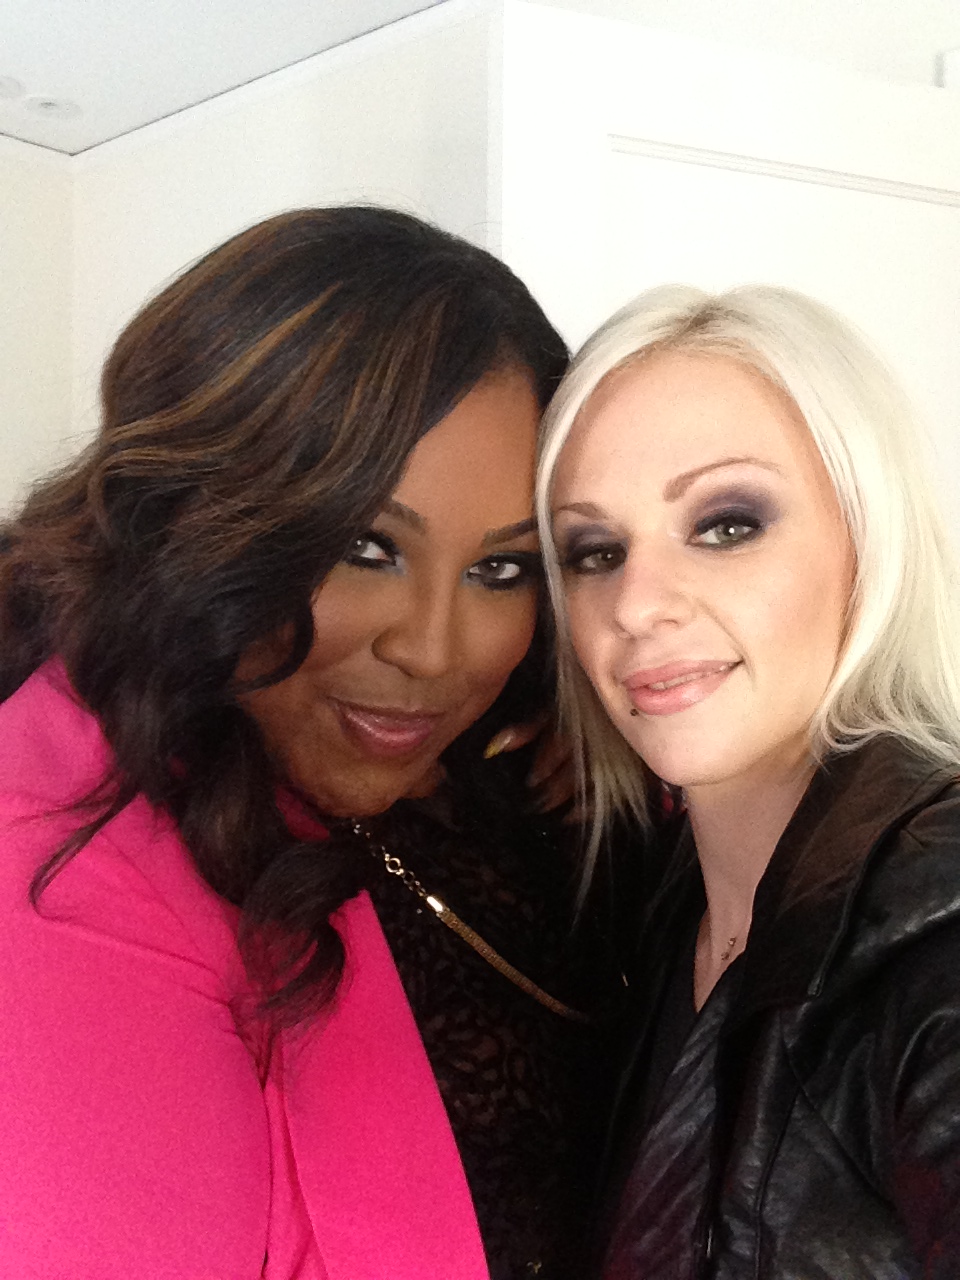 Whitney Whatley (Style Network) and Tanisha from the Oxygen Network at the Hasbro commercial set